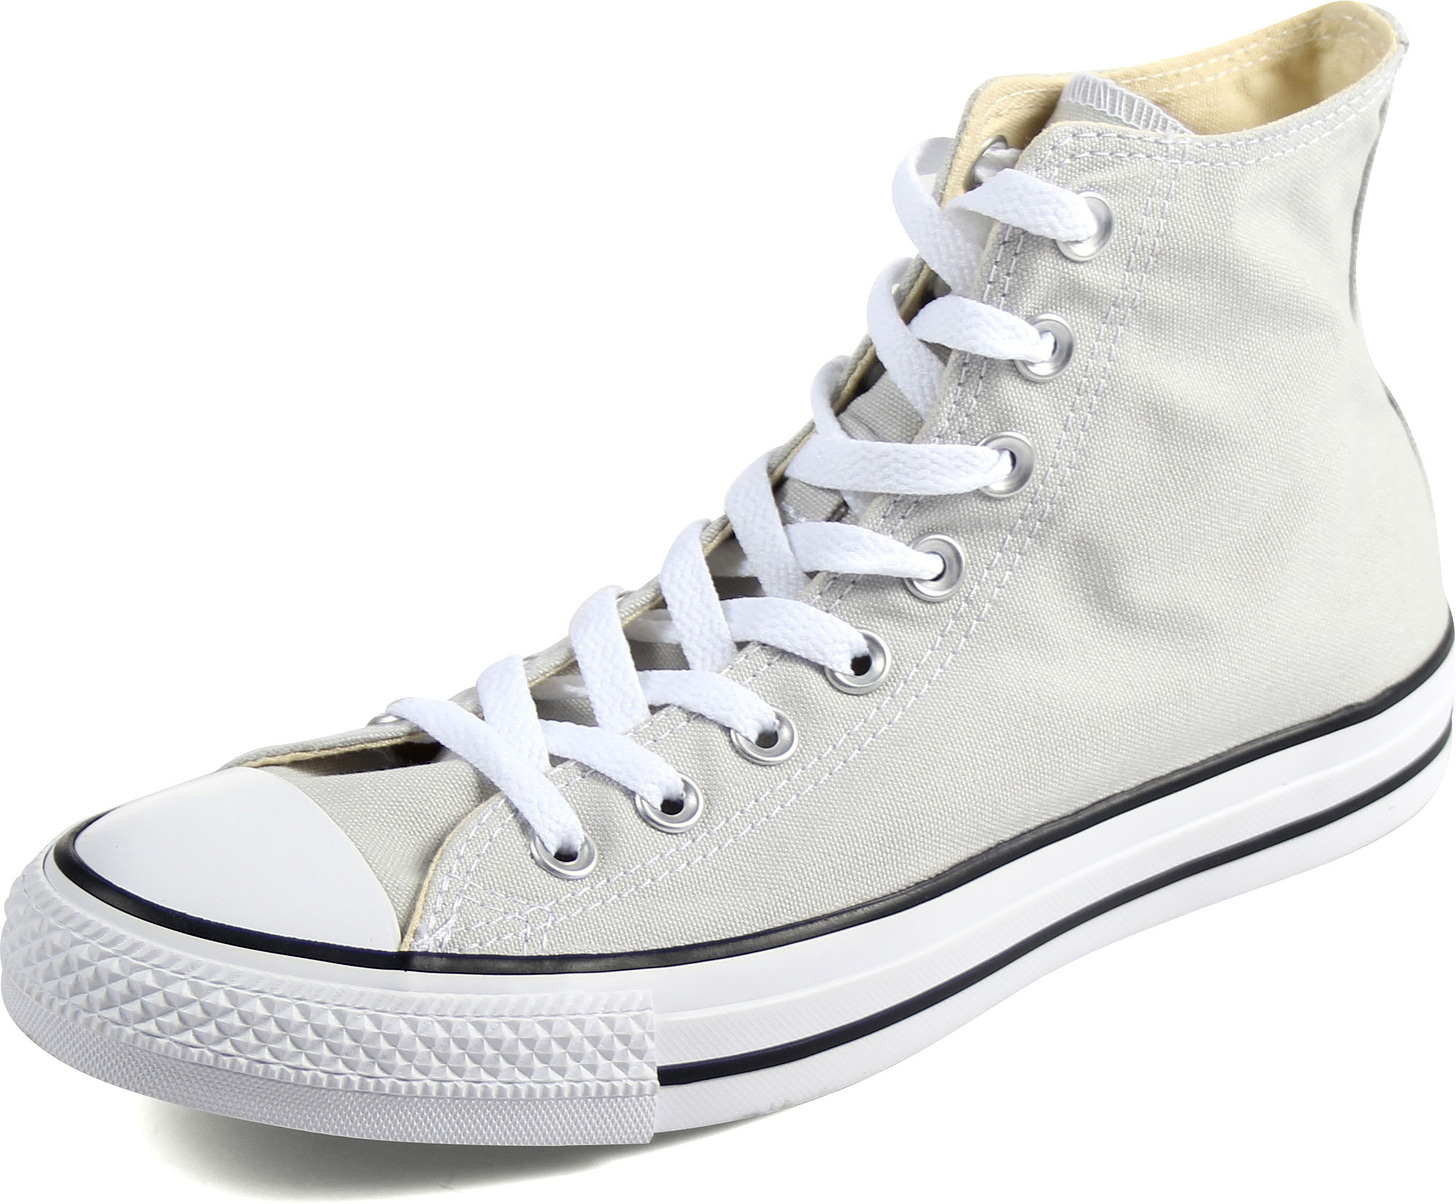 Converse - Chuck Taylor All Star Mouse High top Shoes